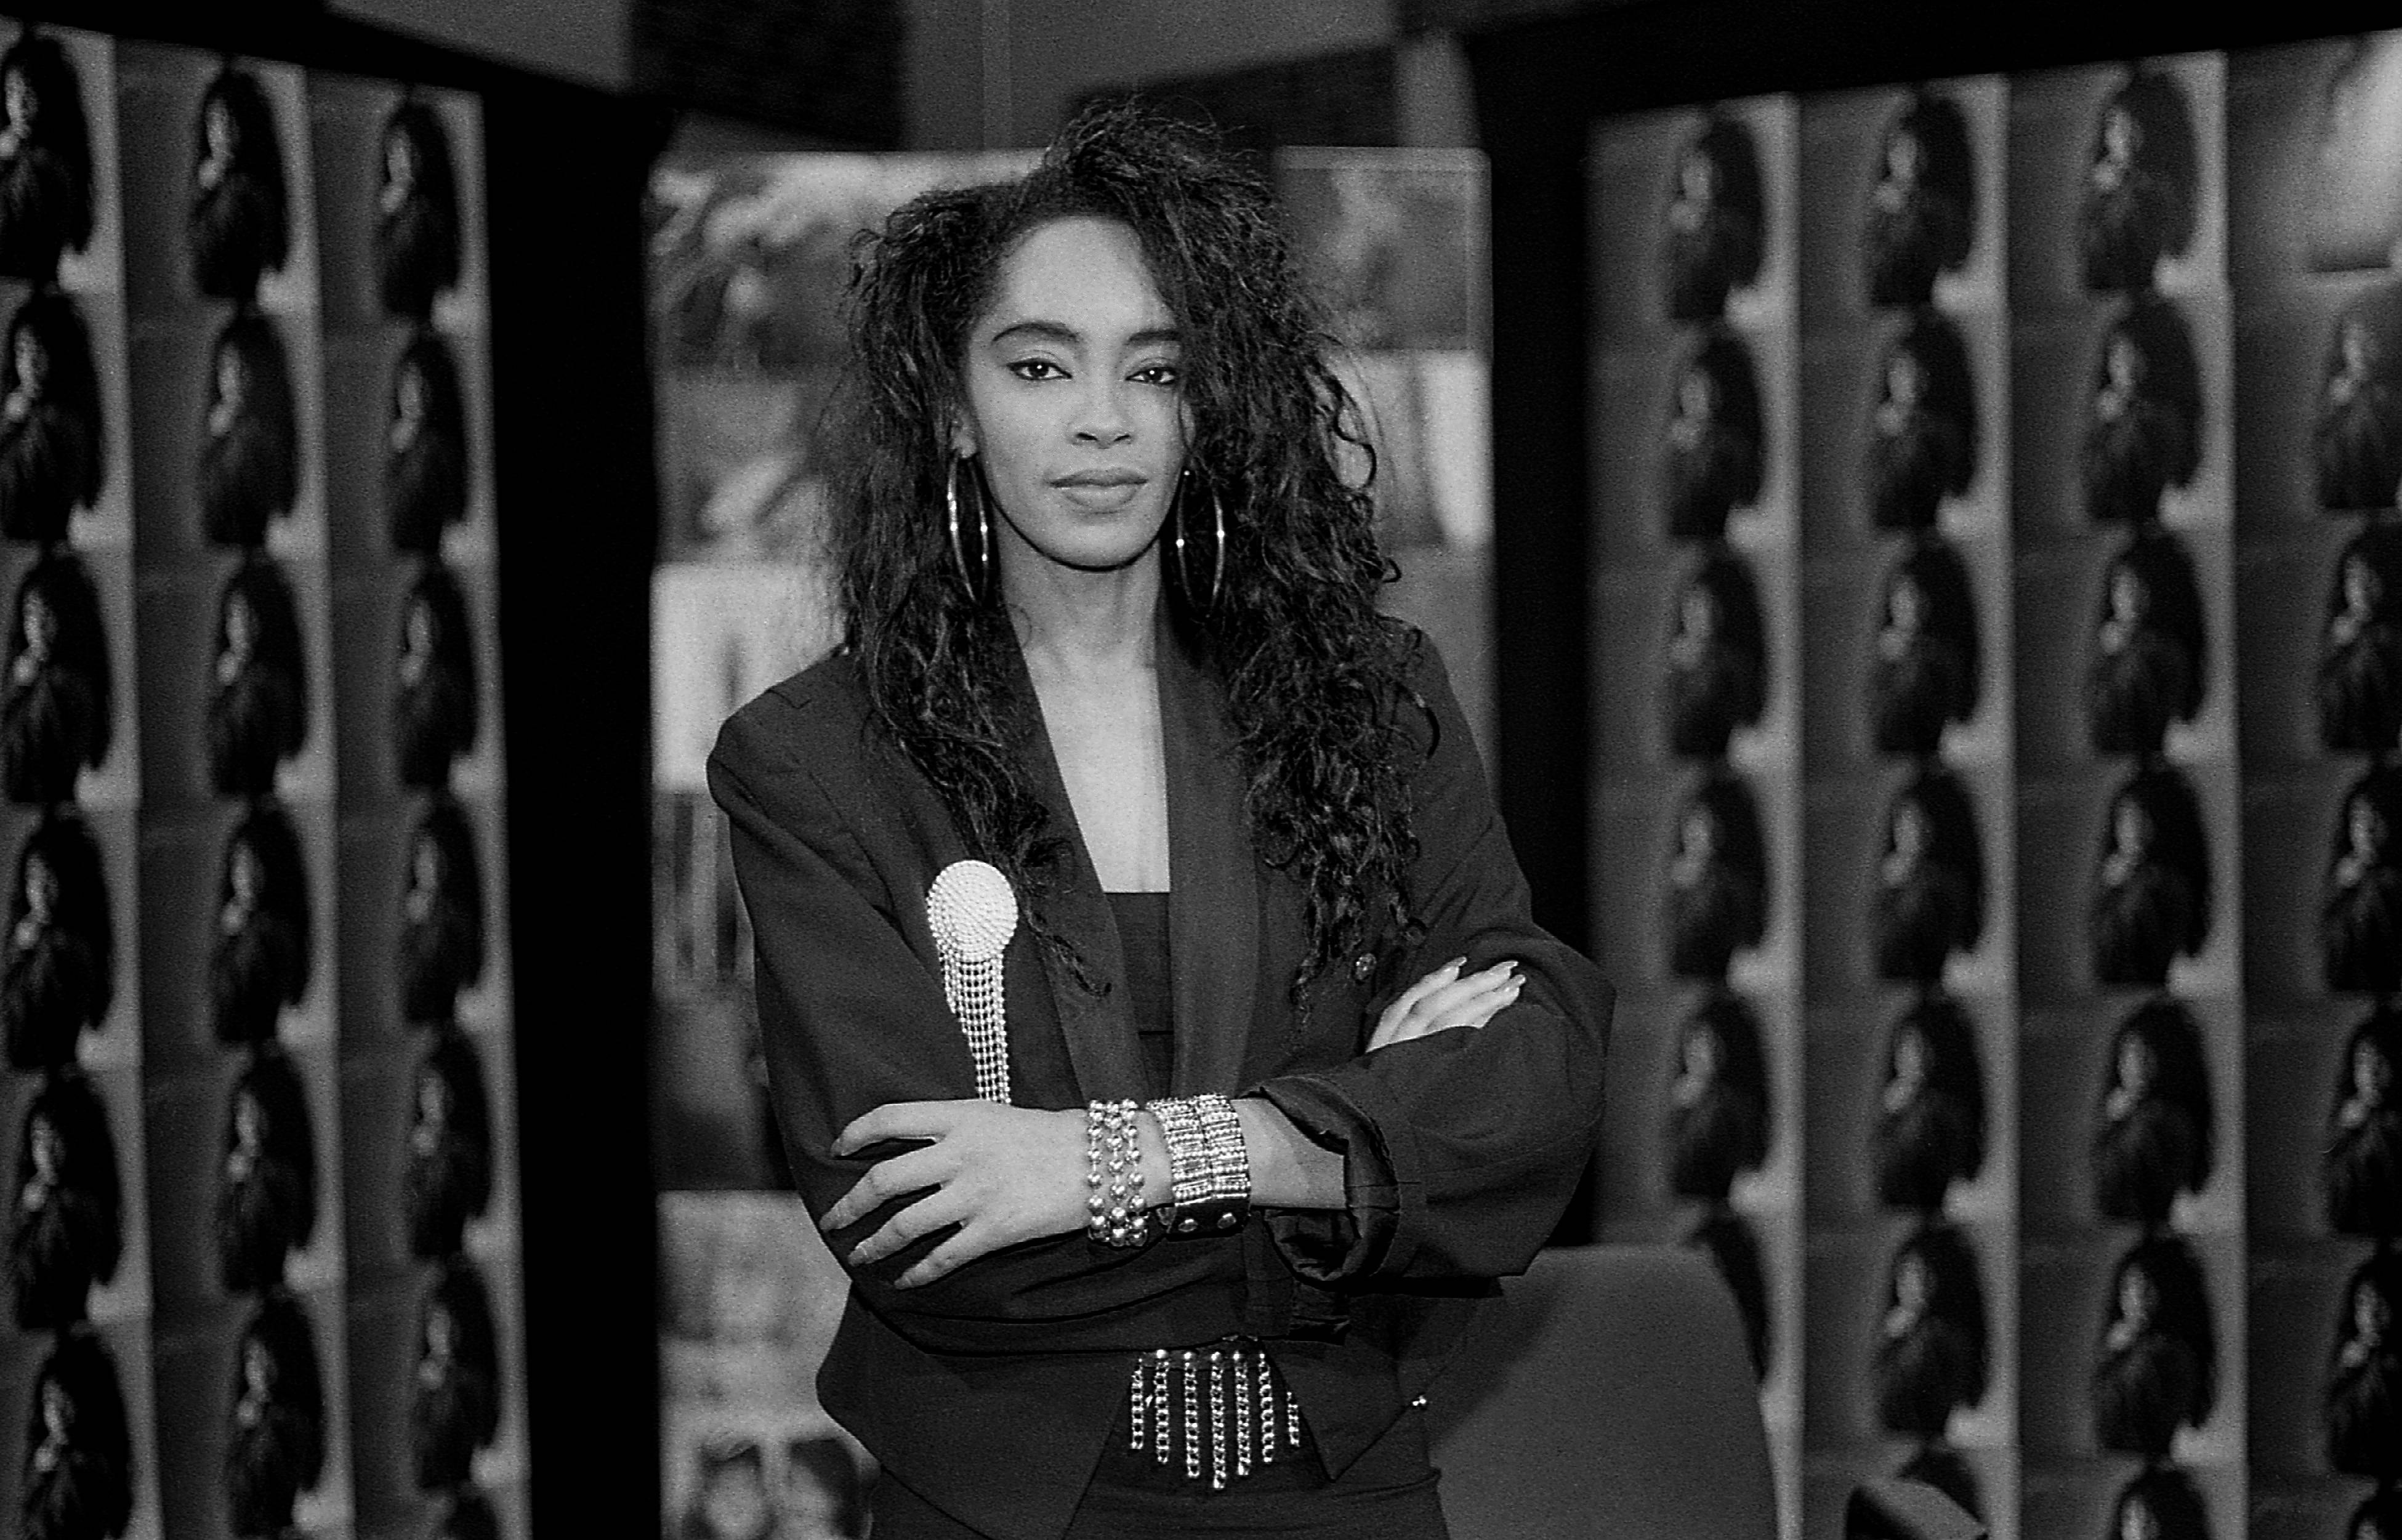 GARY, IN - JANUARY 1987:  Singer, songwriter and dancer Jody Watley poses for photos on the set of 'The Mastersellers' television show in Gary, Indiana in January 1987.  (Photo By Raymond Boyd/Getty Images)